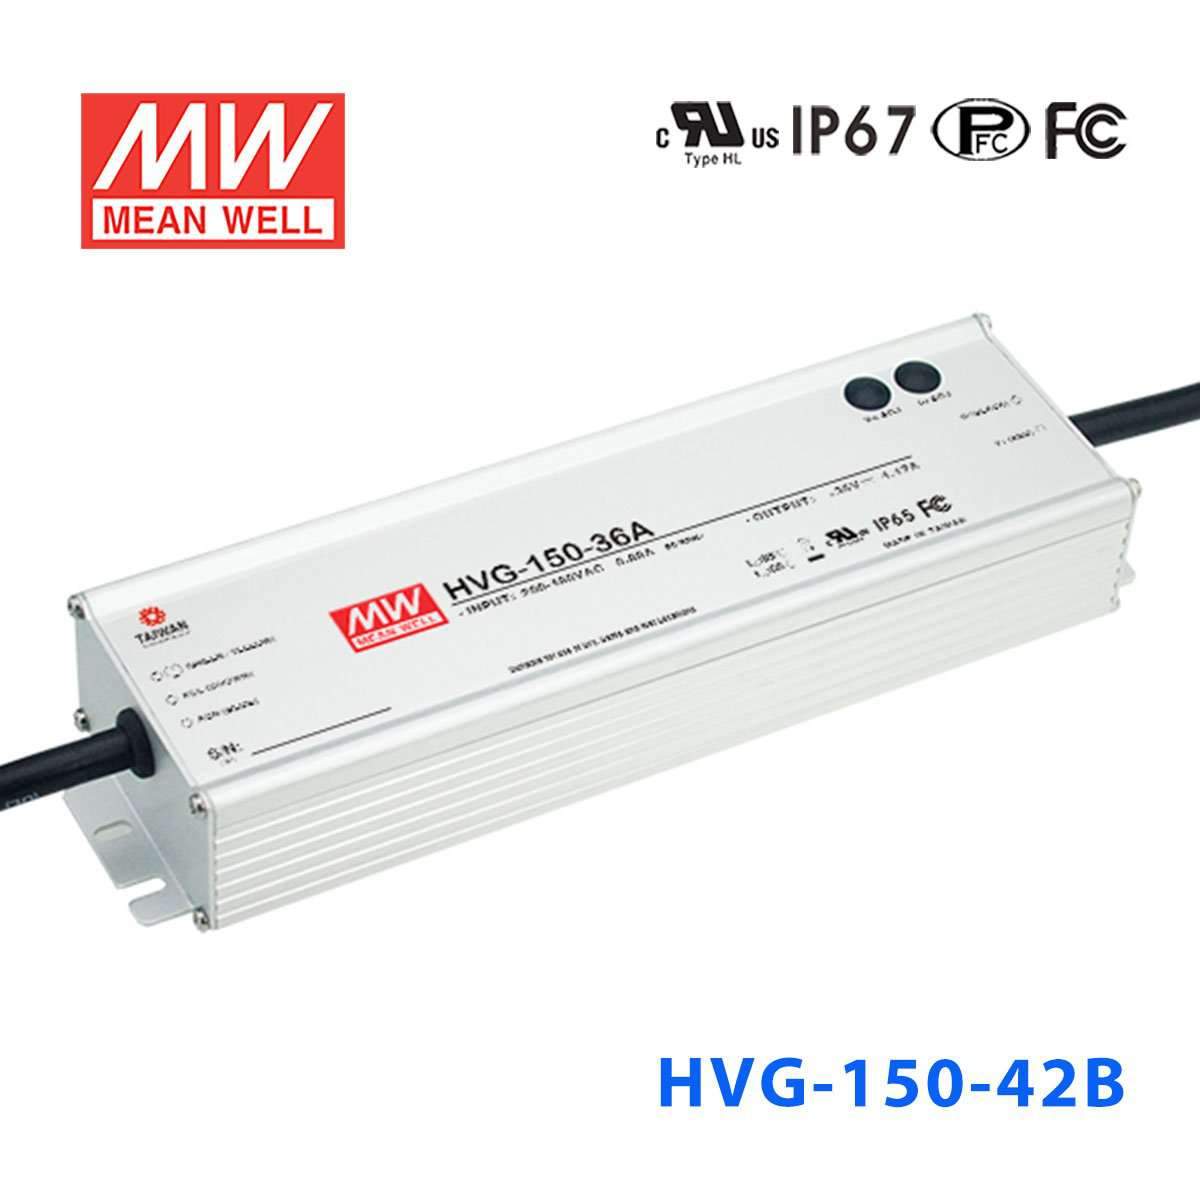 Mean Well HVG-150-42B Power Supply 150W 42V - Dimmable